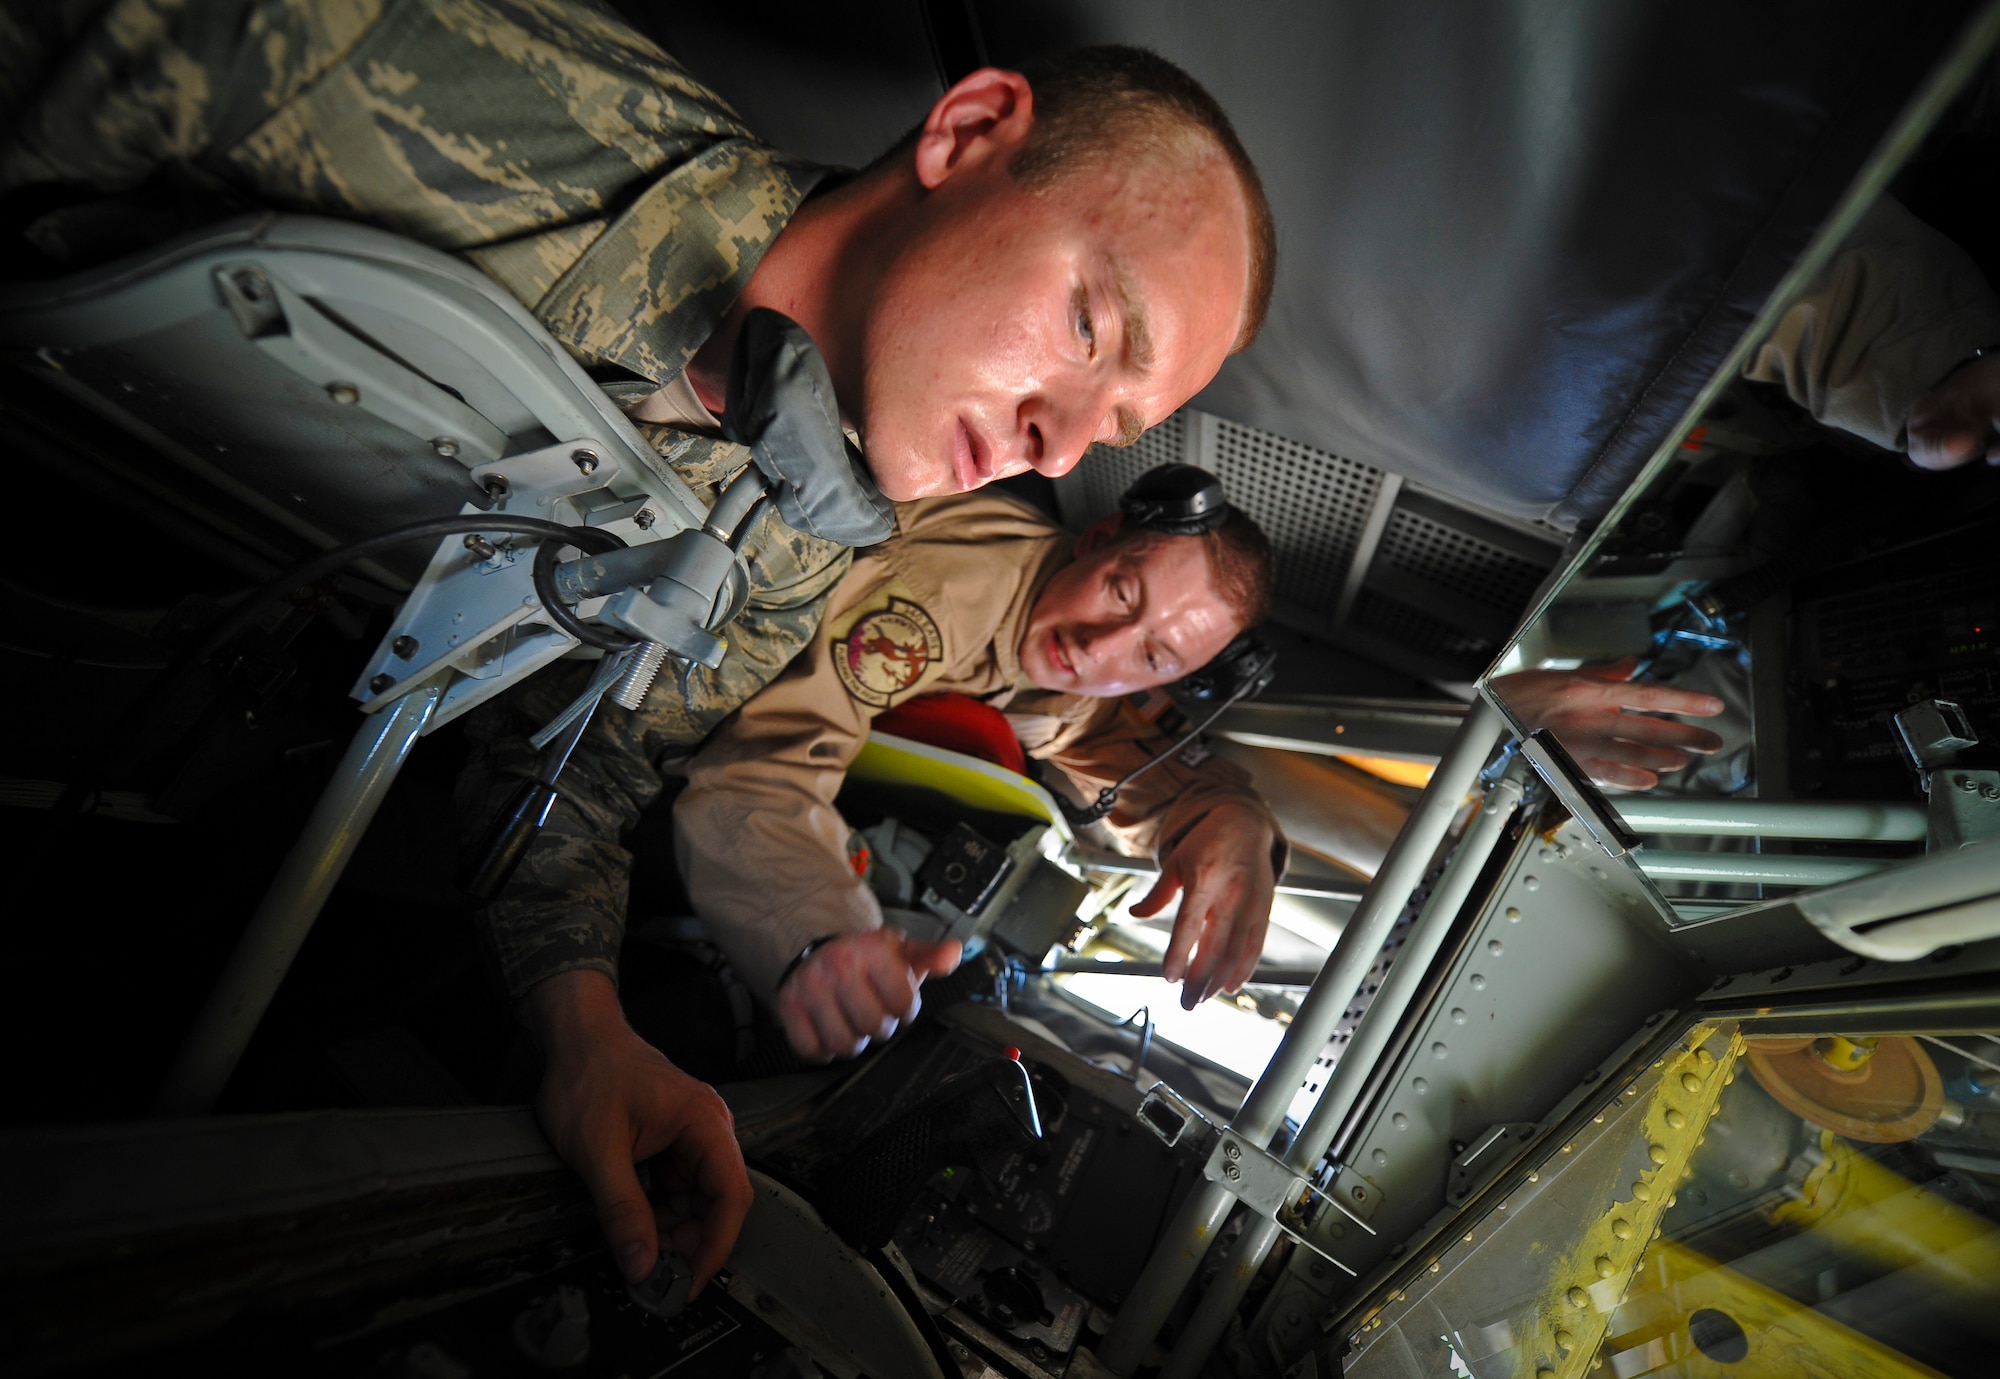 Staff Sgt. Samuel Martinez shows Cadet Aubry Eaton how to operate the boom controls on board a KC-135 Stratotanker at the 379th Air Expeditionary Wing in Southwest Asia, June 24, 2013. Martinez is a 340th Expeditionary Air Refueling Squadron boom operator deployed from McConnell Air Force Base, Kan. More than 40 U.S. Air Force Academy cadets visited the 379th AEW in June observing deployed operations first-hand and interacting with deployed U.S. and coalition forces. (U.S. Air Force photo/Senior Airman Benjamin Stratton)